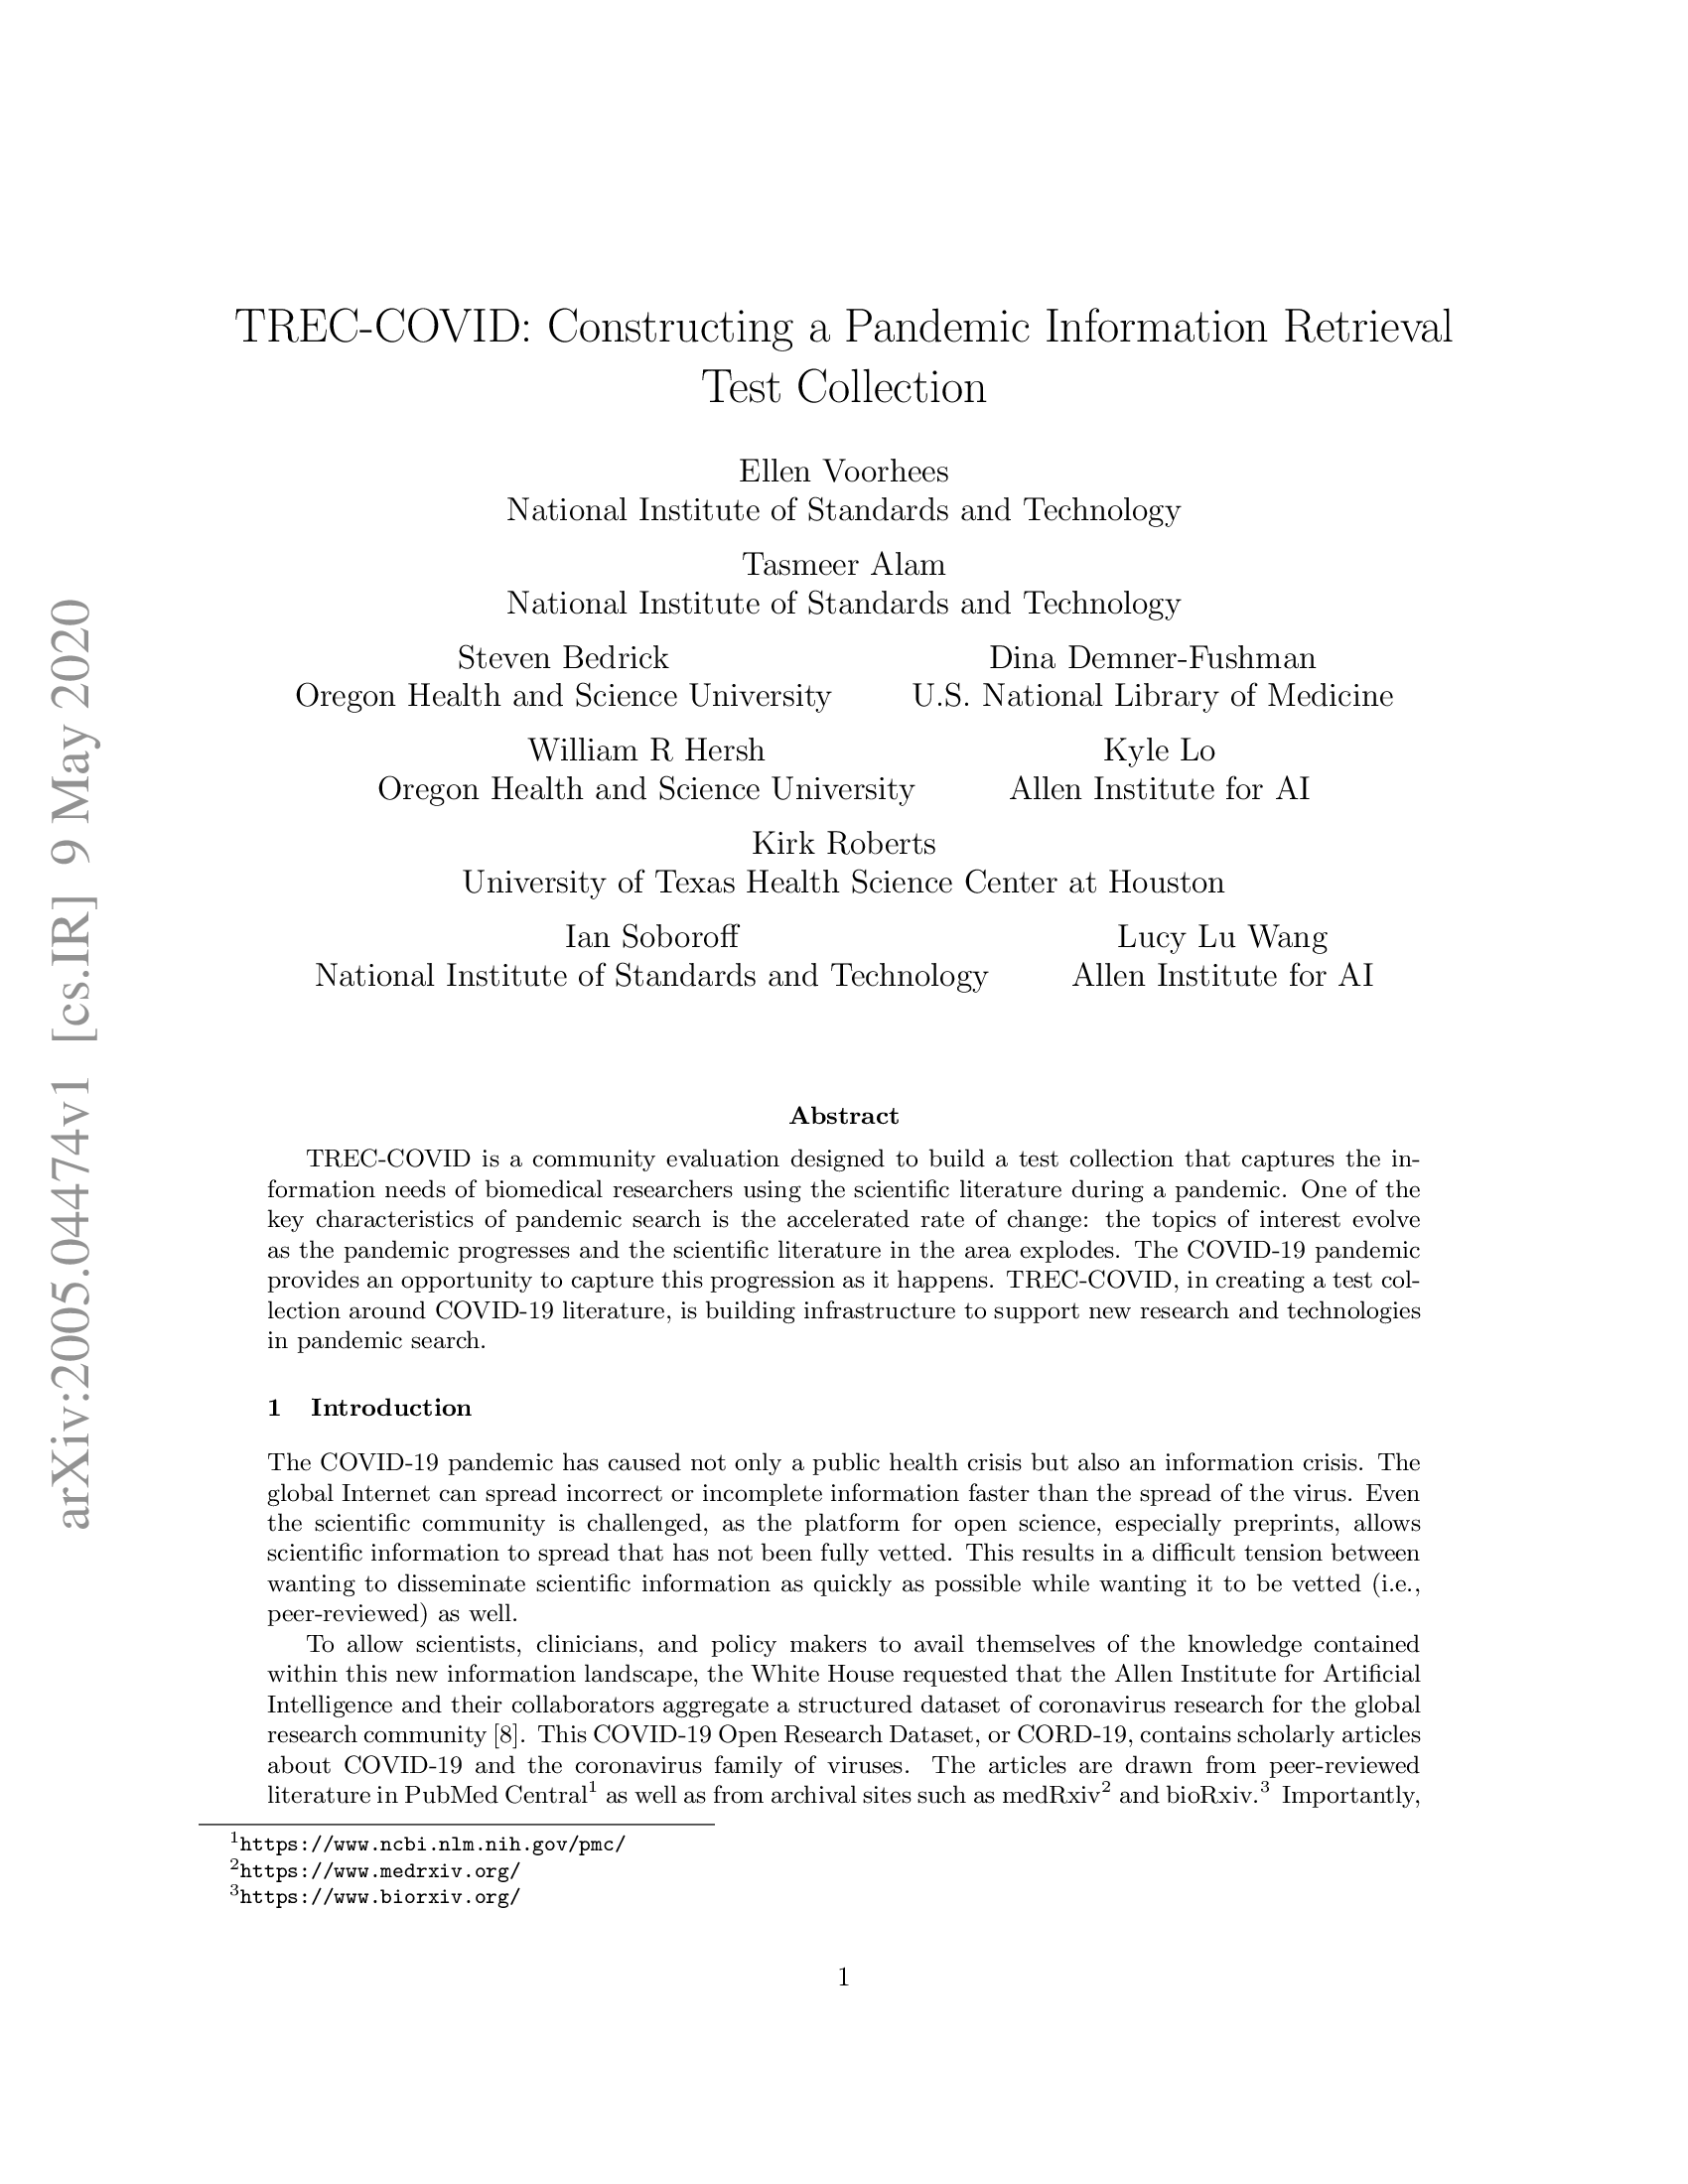 TREC-COVID: Constructing a Pandemic Information Retrieval Test Collection